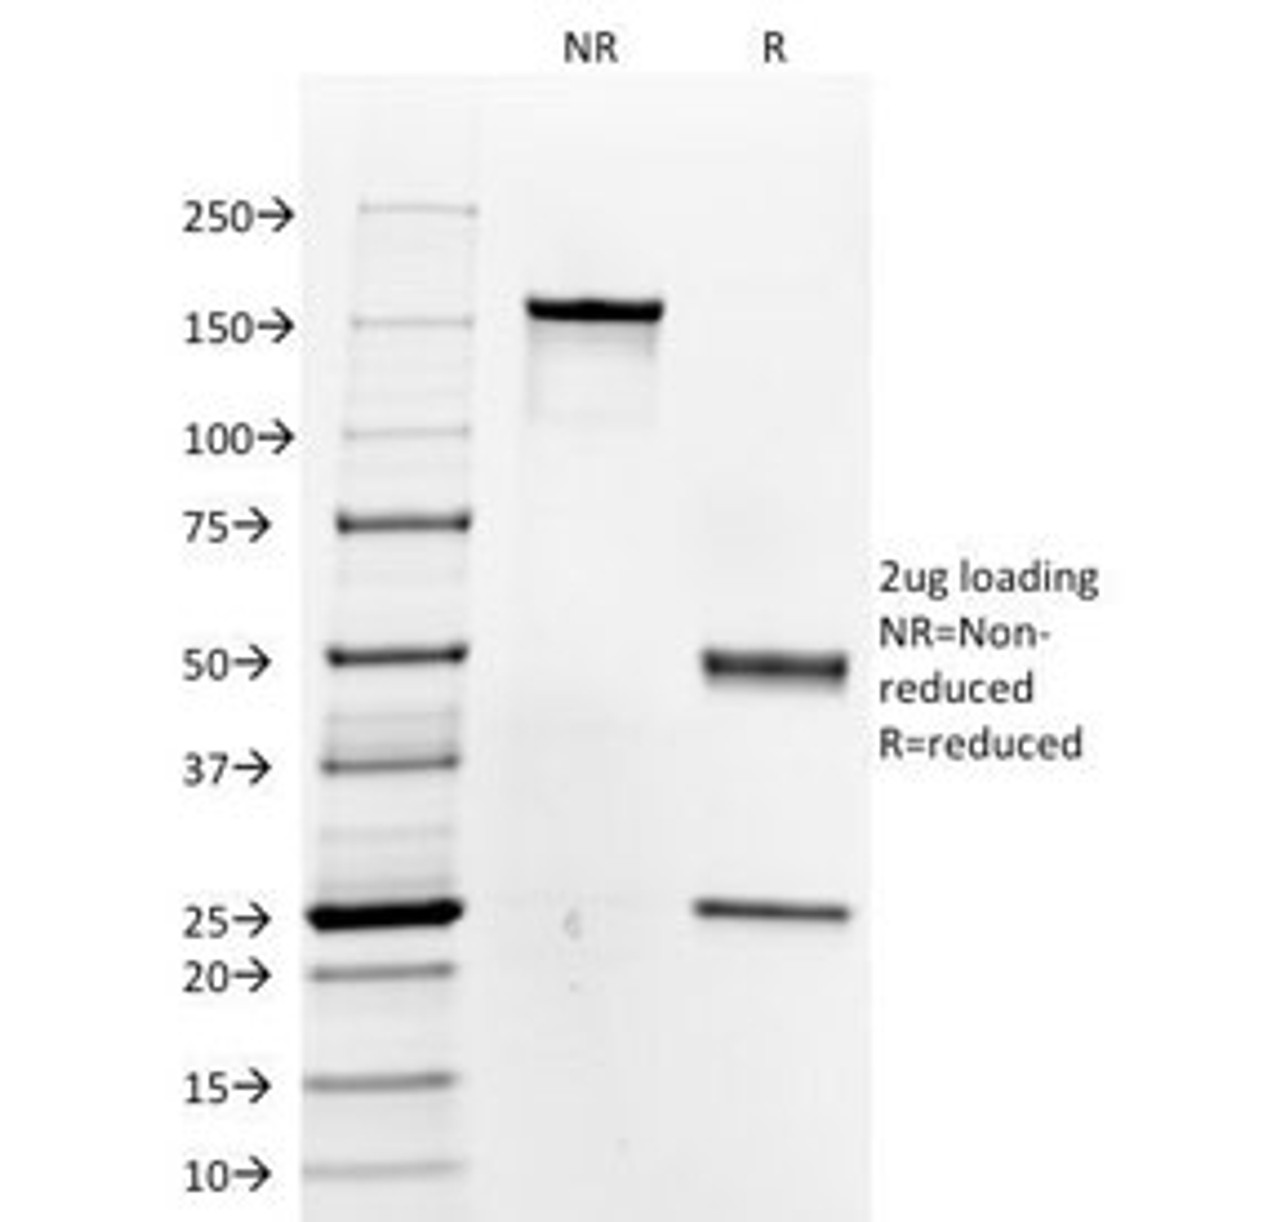 SDS-PAGE Analysis of Purified, BSA-Free Thyroglobulin Antibody (clone 6E1 or TGB05) . Confirmation of Integrity and Purity of the Antibody.